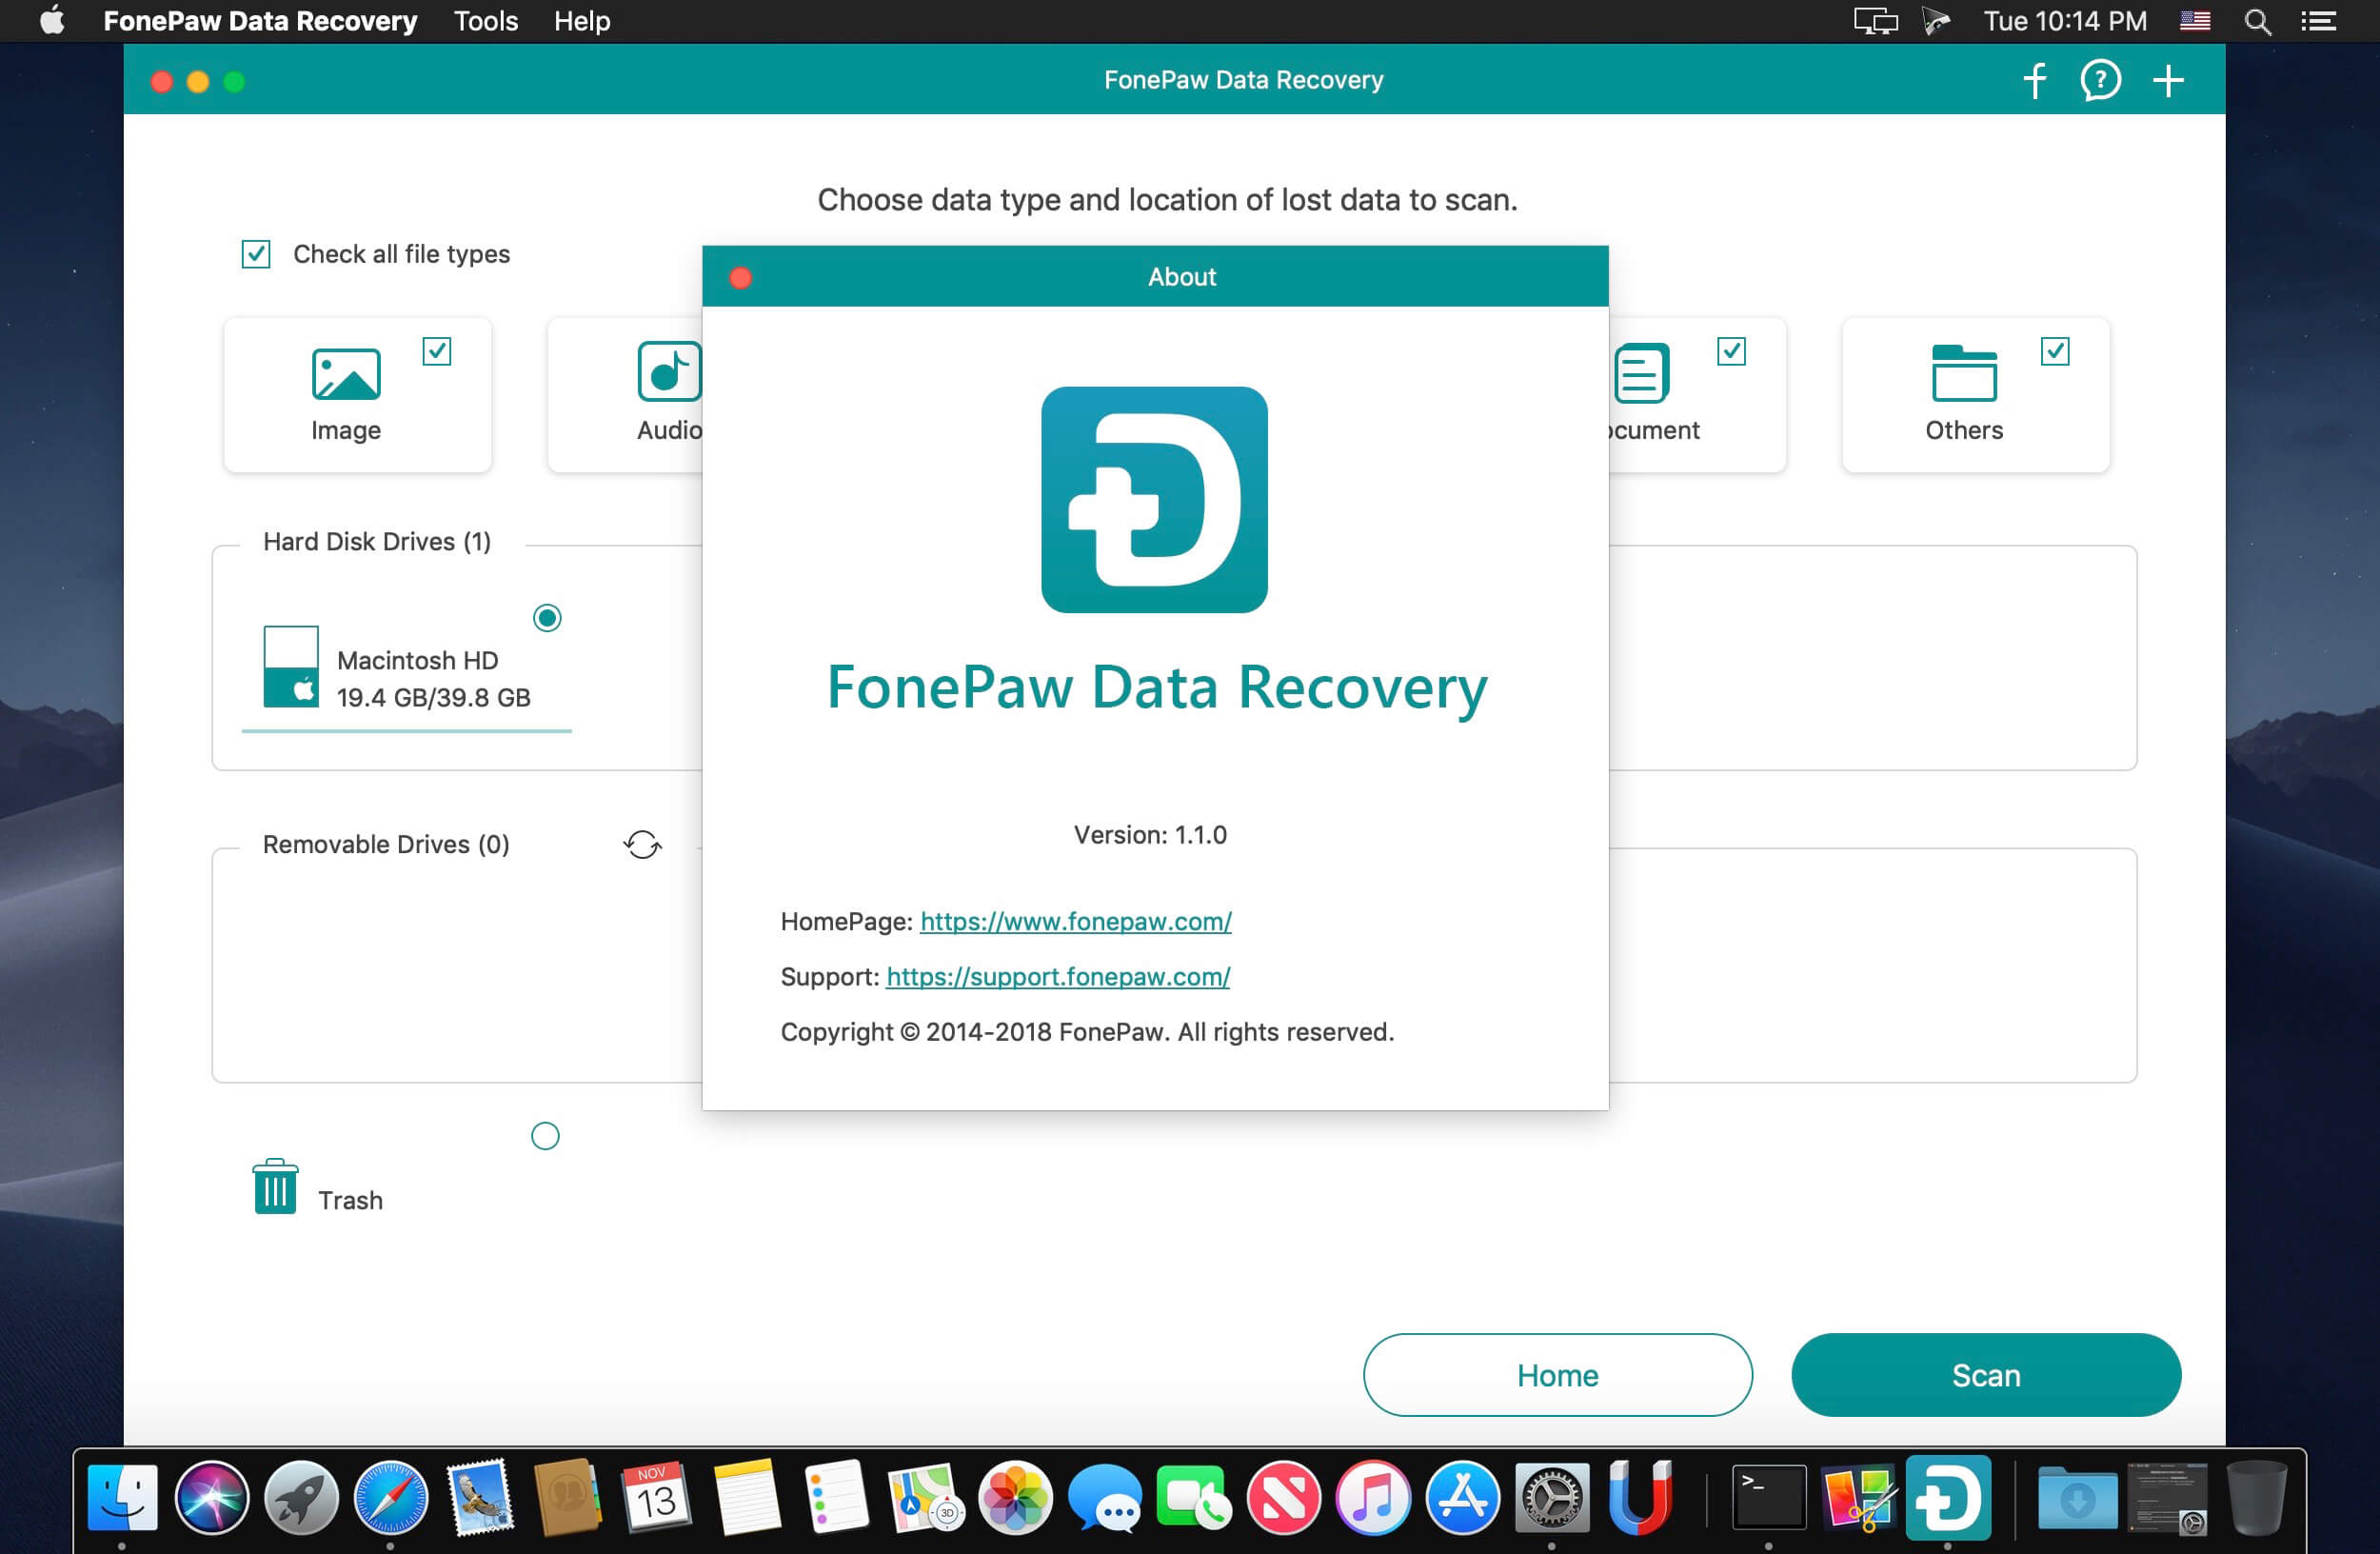 iphone data recovery for a chromebook